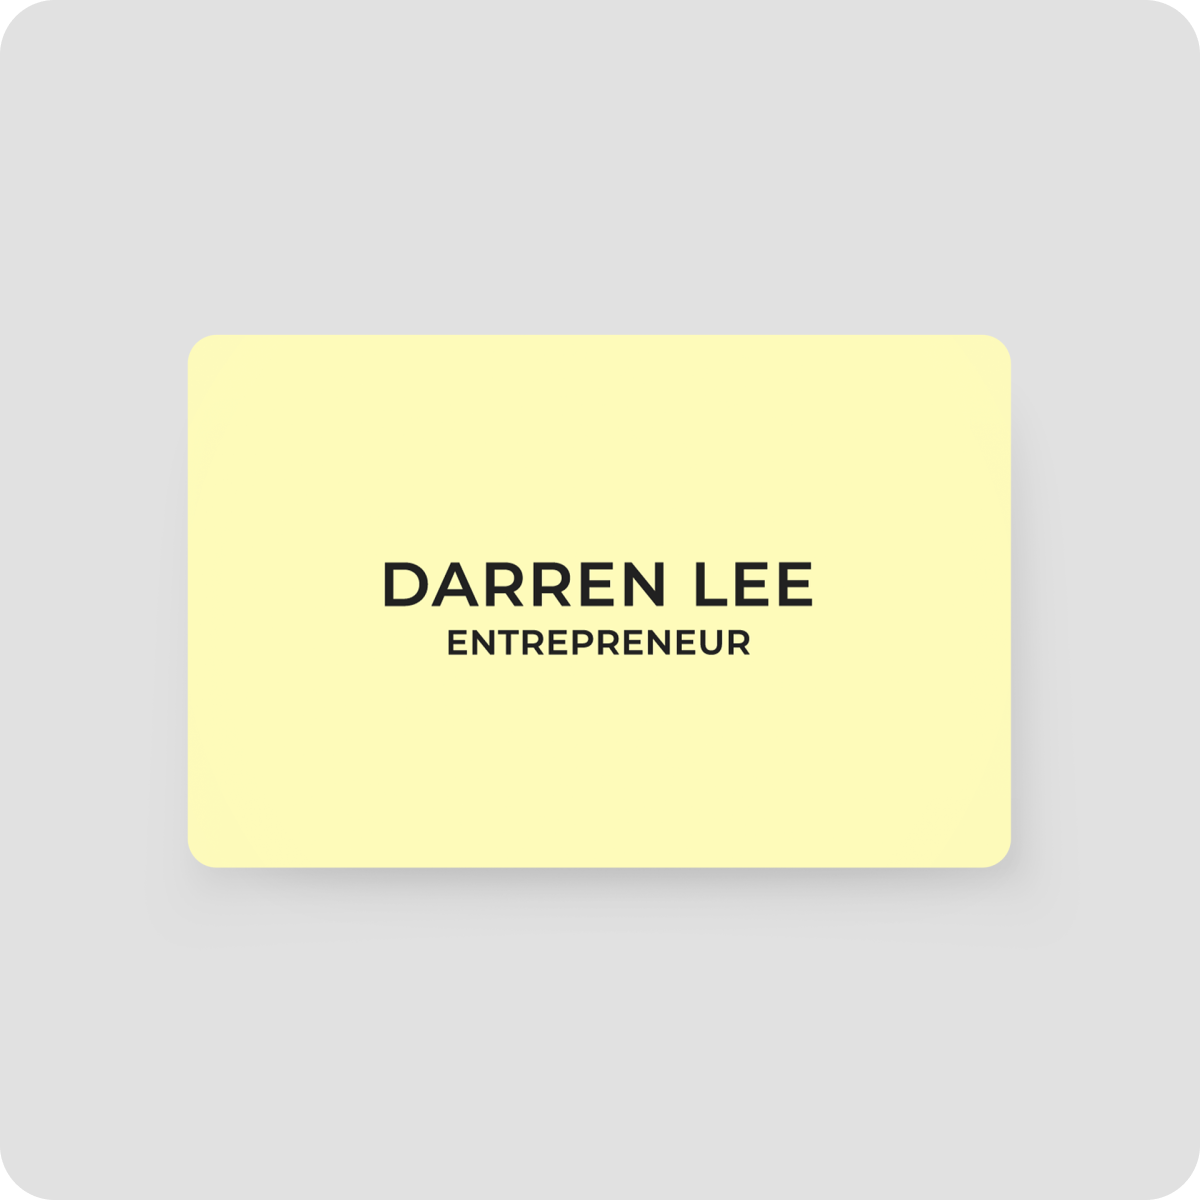 One Good Card: Smart Digital Name Card (Modern) - Personalised Near Field Communication (NFC) Digital Business Cards designs - Daisy yellow